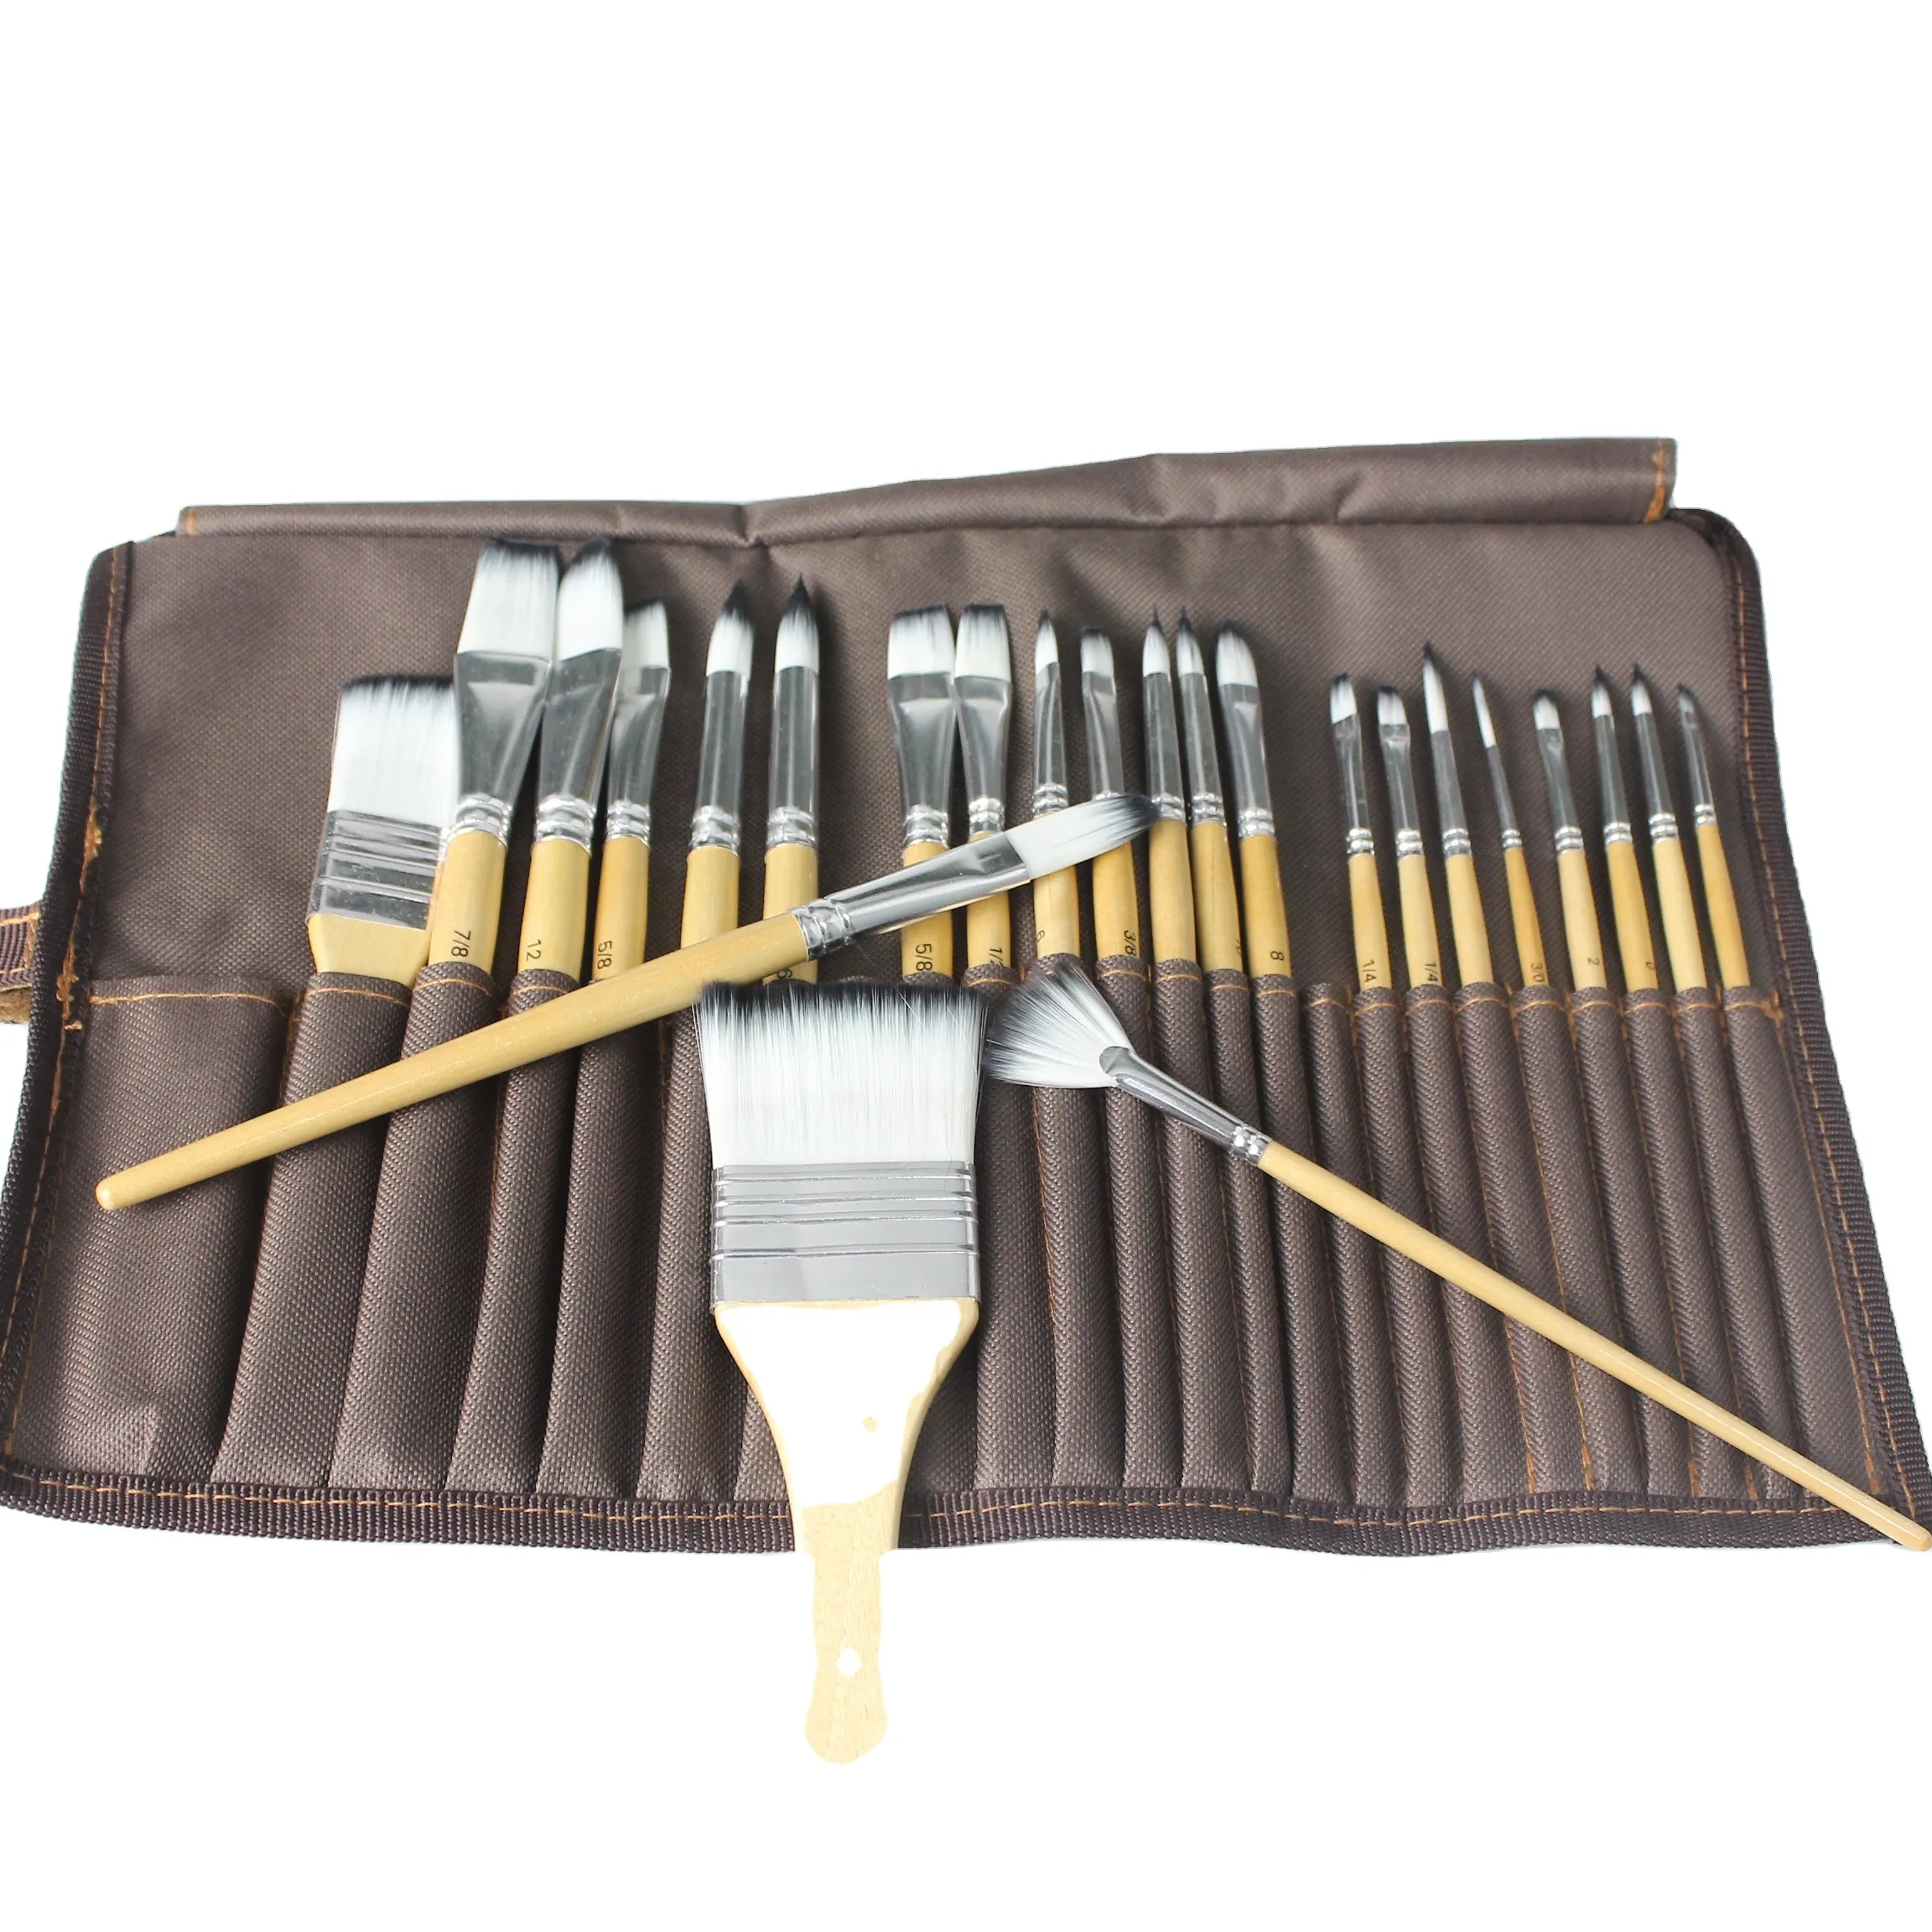 2021 New Professional 24pcs Paint Brush Set Round Pointed Tip Nylon Hair Artist Acrylic Paint Brush for Watercolor Oil Painting